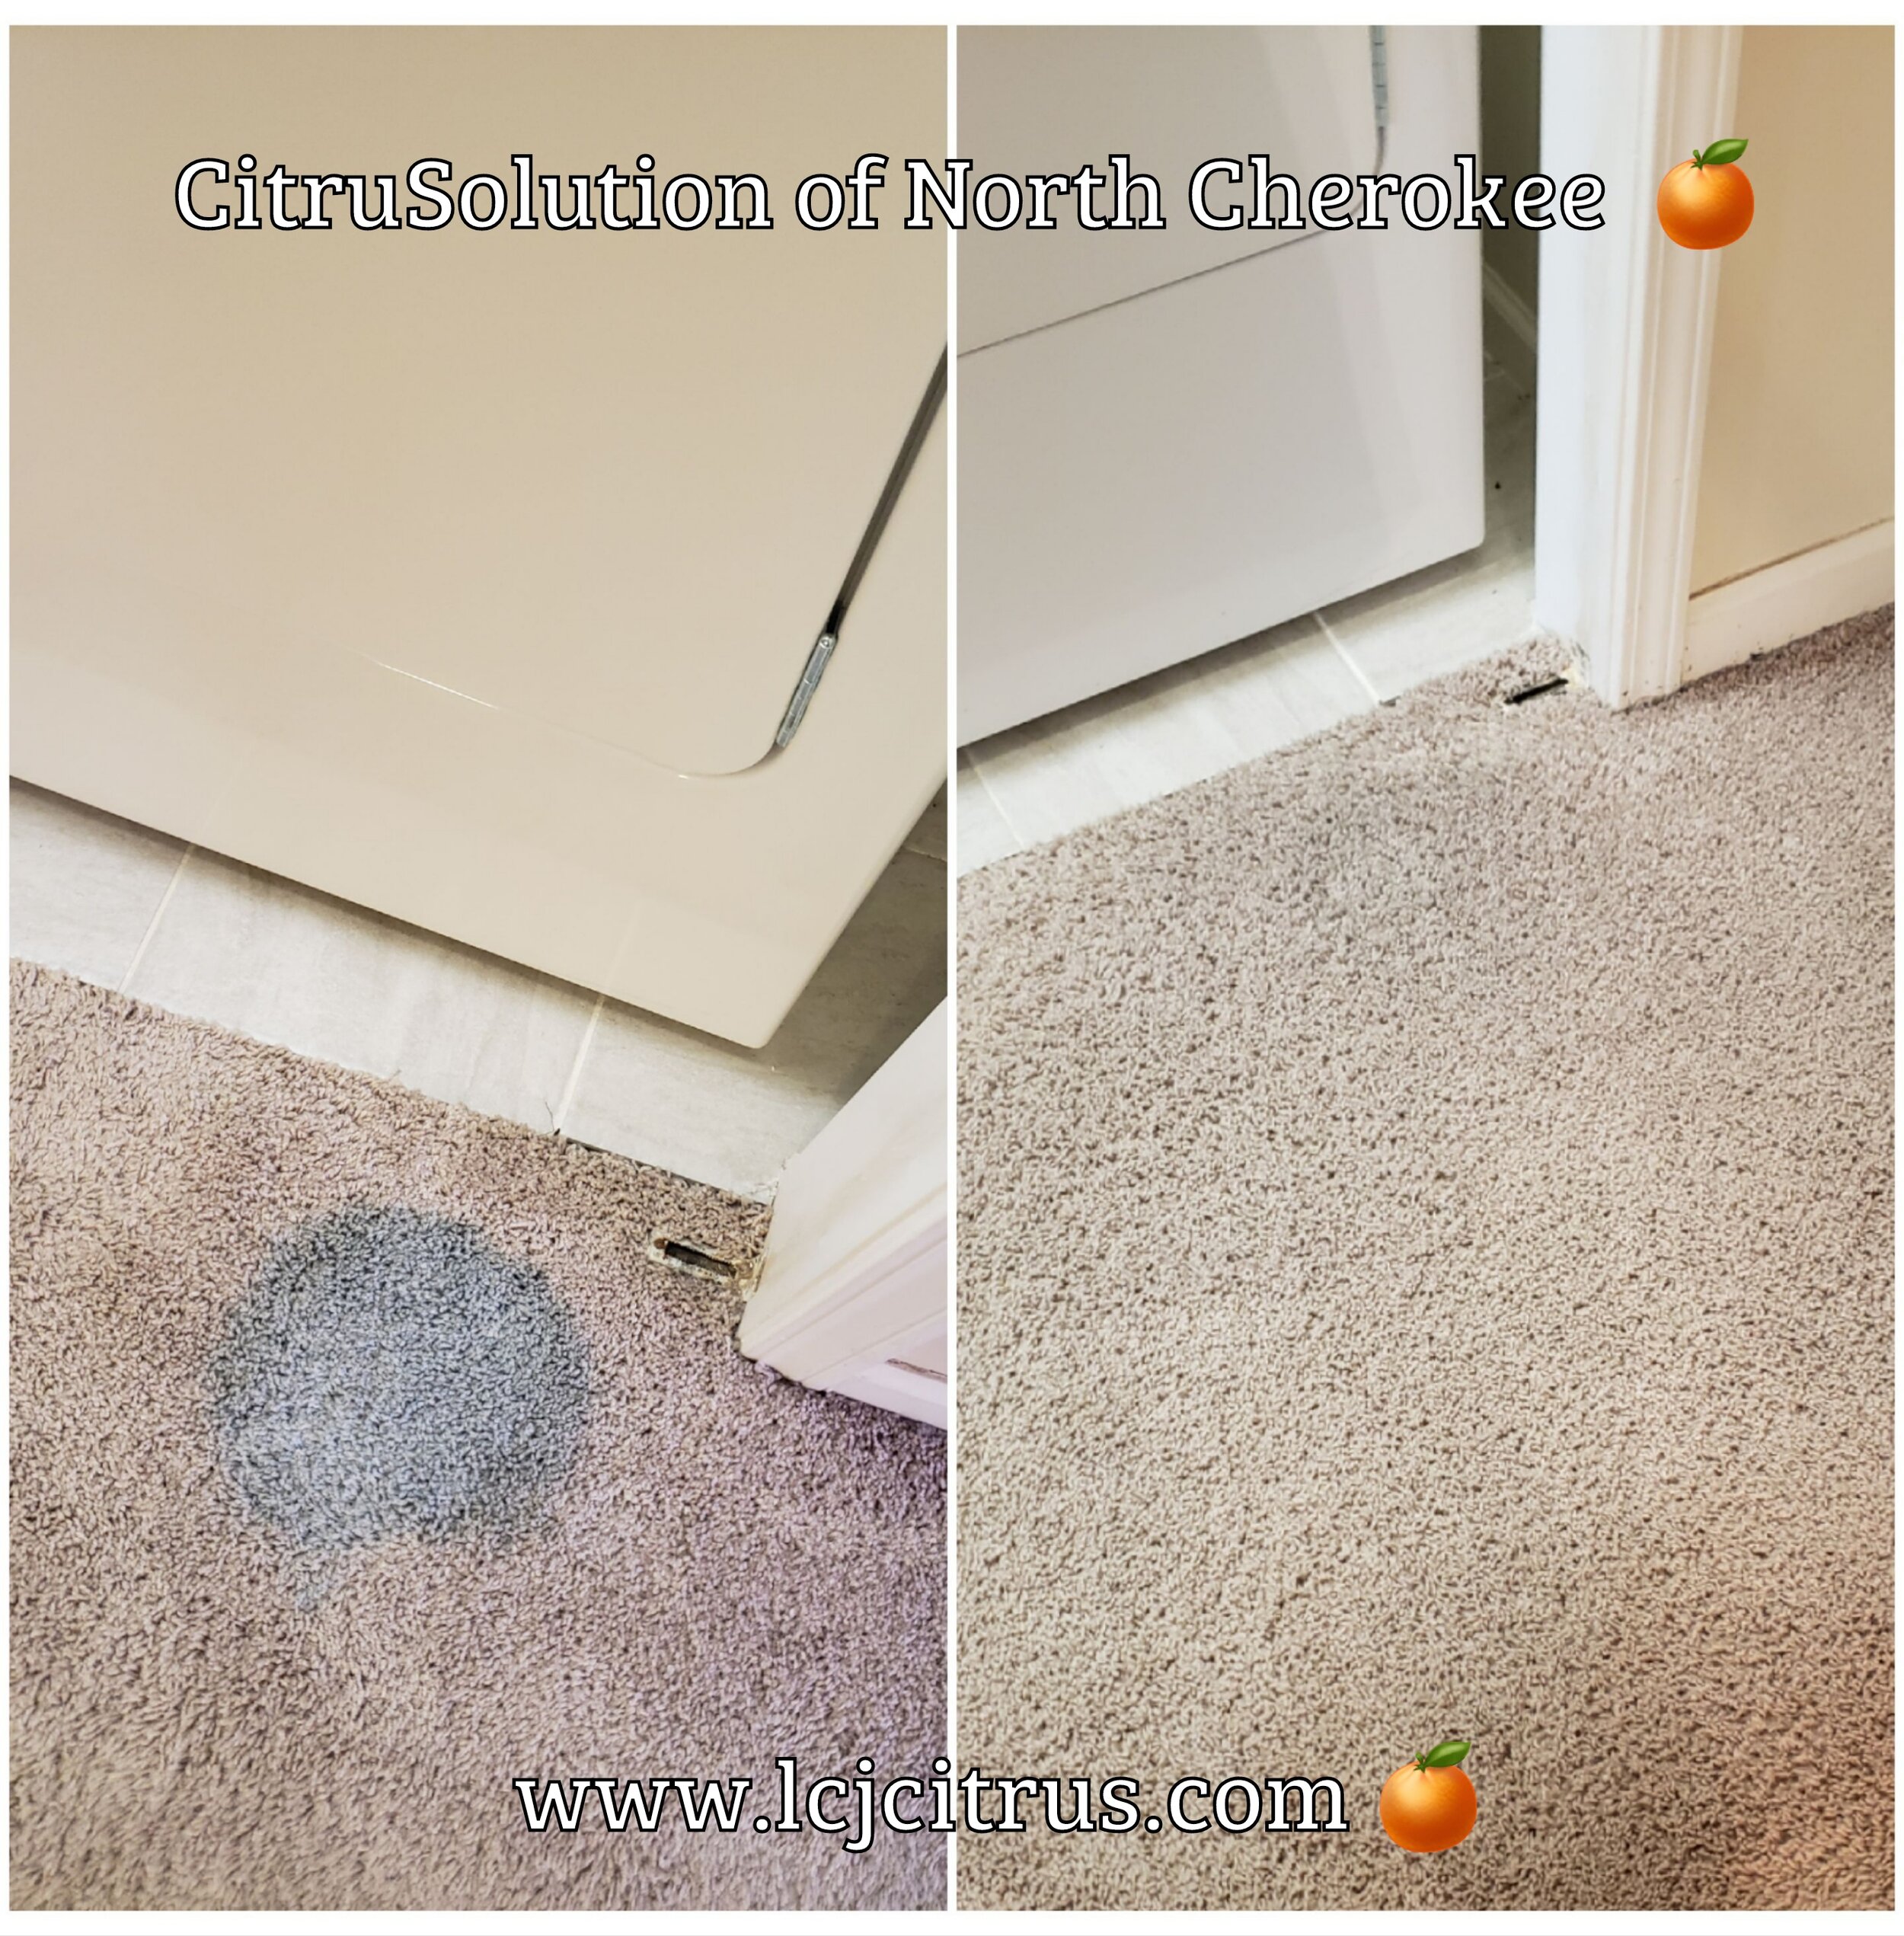 Blue Detergent Stain removed from our customer's carpet!